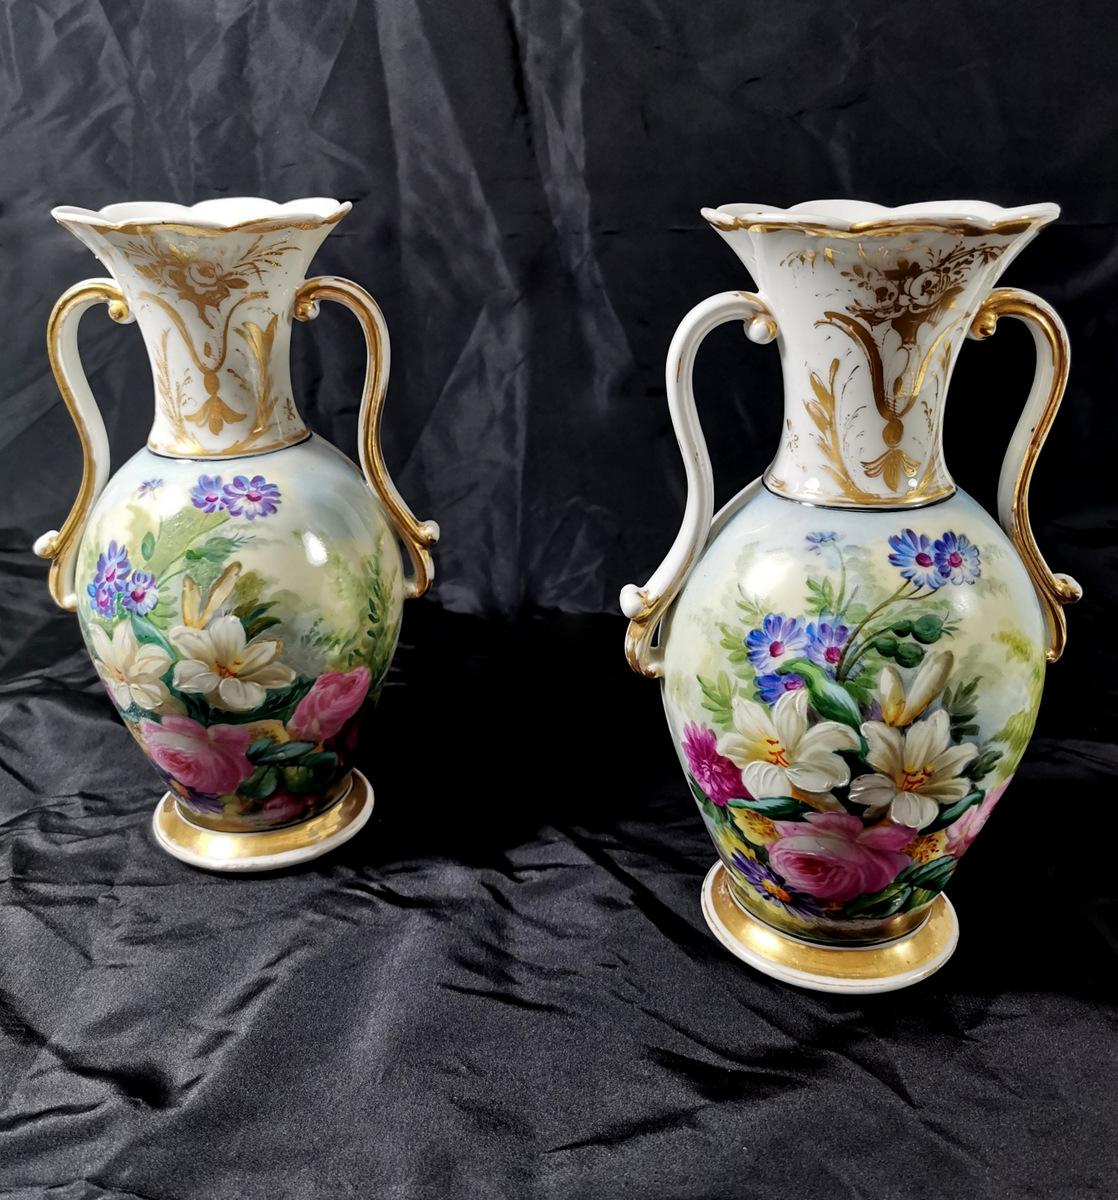 We kindly suggest you read the whole description, because with it we try to give you detailed technical and historical information to guarantee the authenticity of our objects.
A pair of antique French porcelain (Porcelain de Paris) vases with